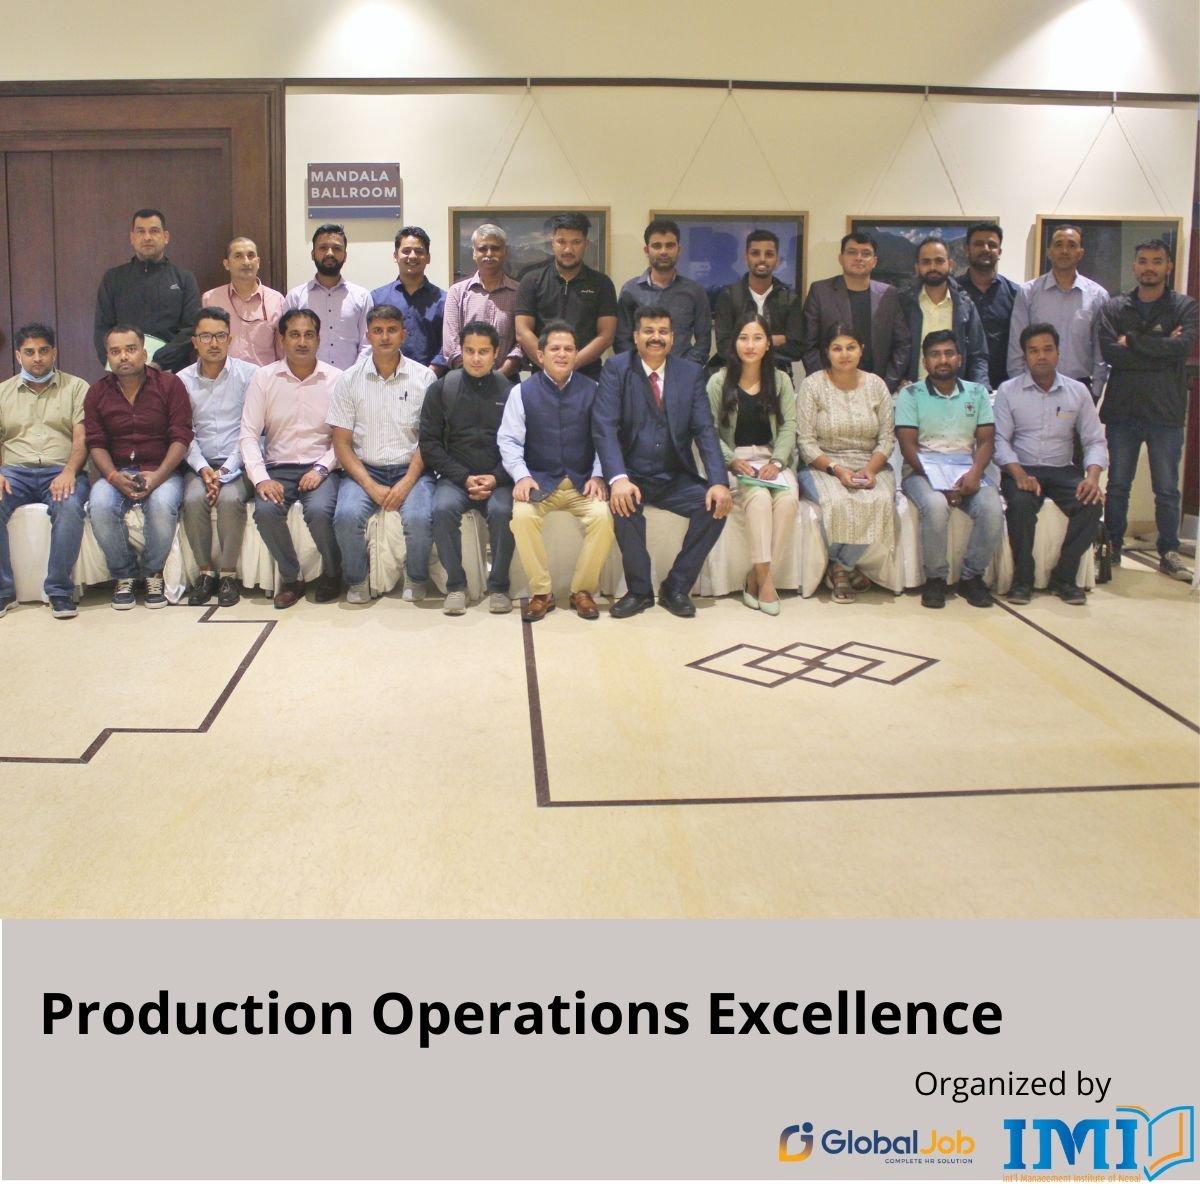 Workshop on "Production Operations Excellence"